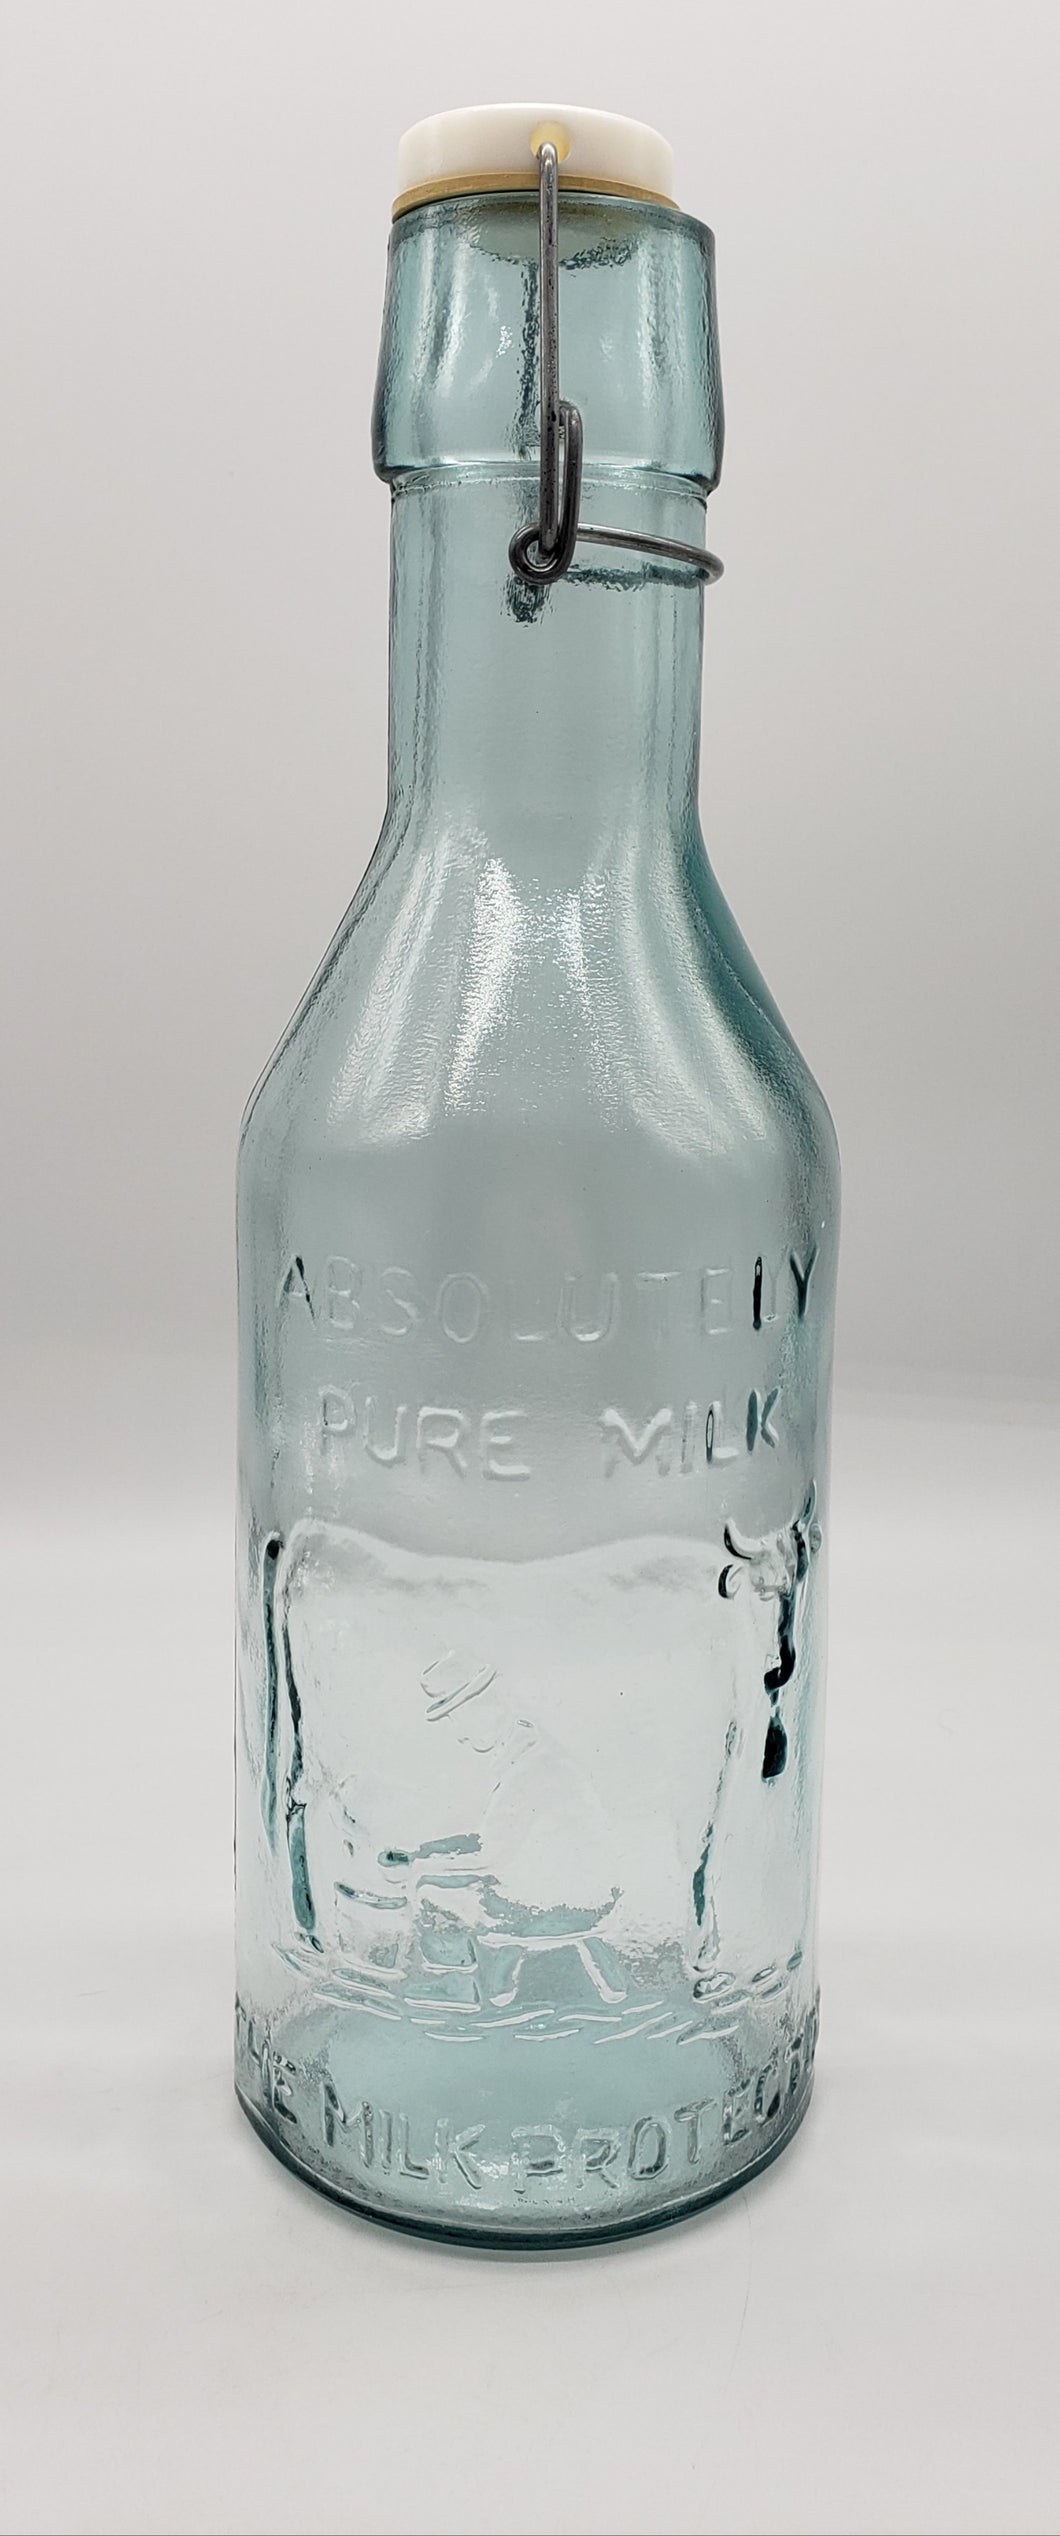 VINTAGE ABSOLUTELY PURE MILK BOTTLE MADE IN ITALY 40oz